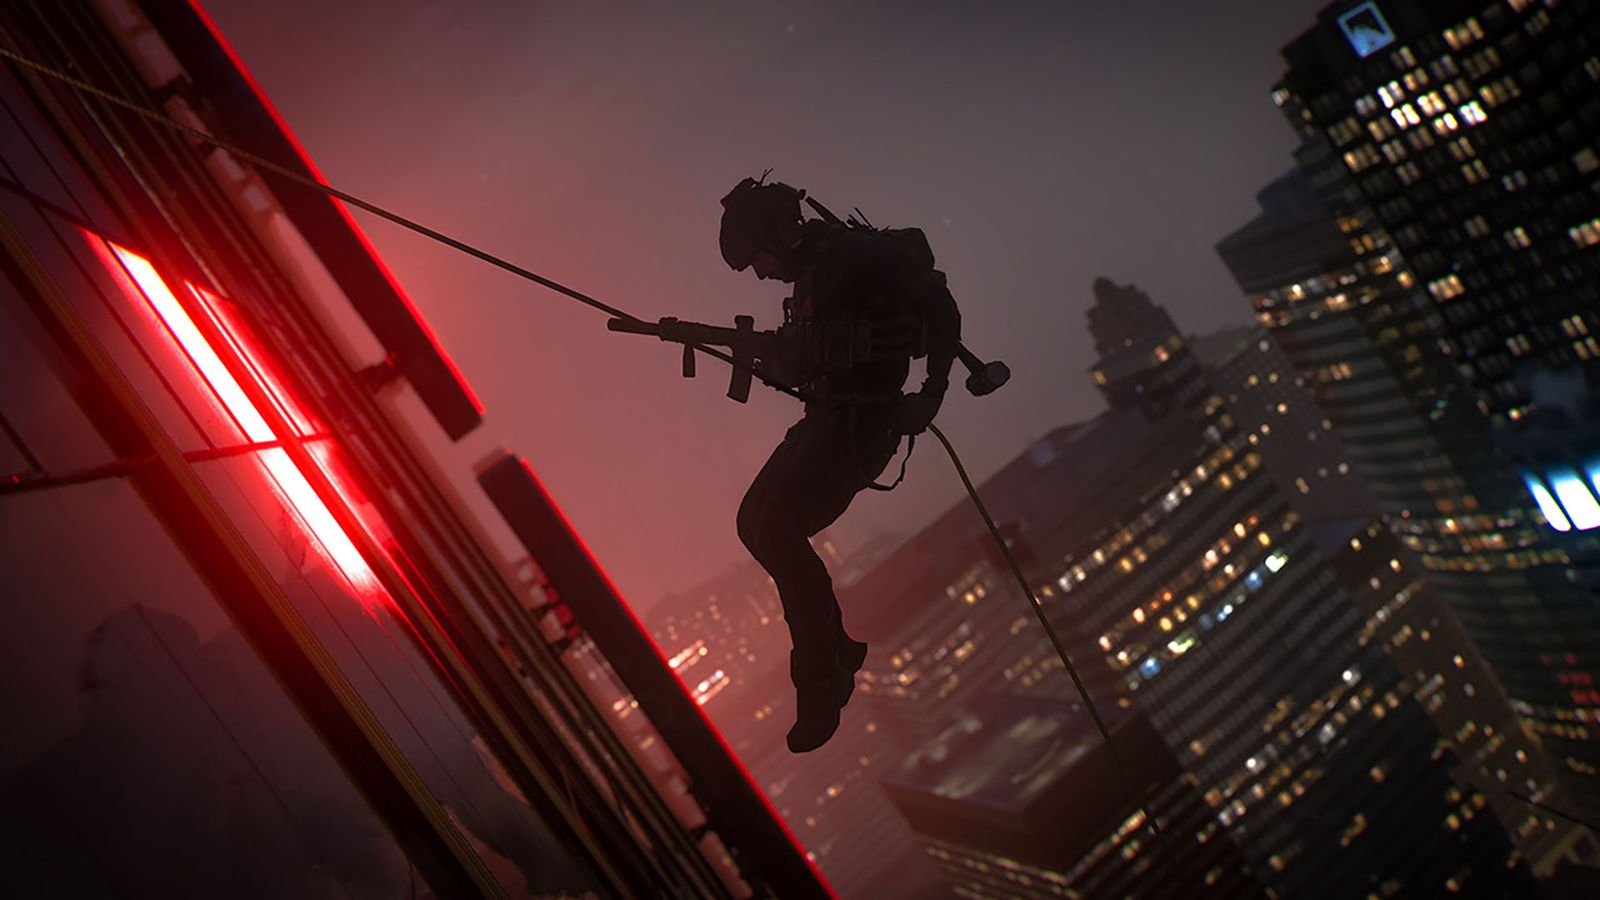 Modern Warfare 3 player abseiling down building lit with red light